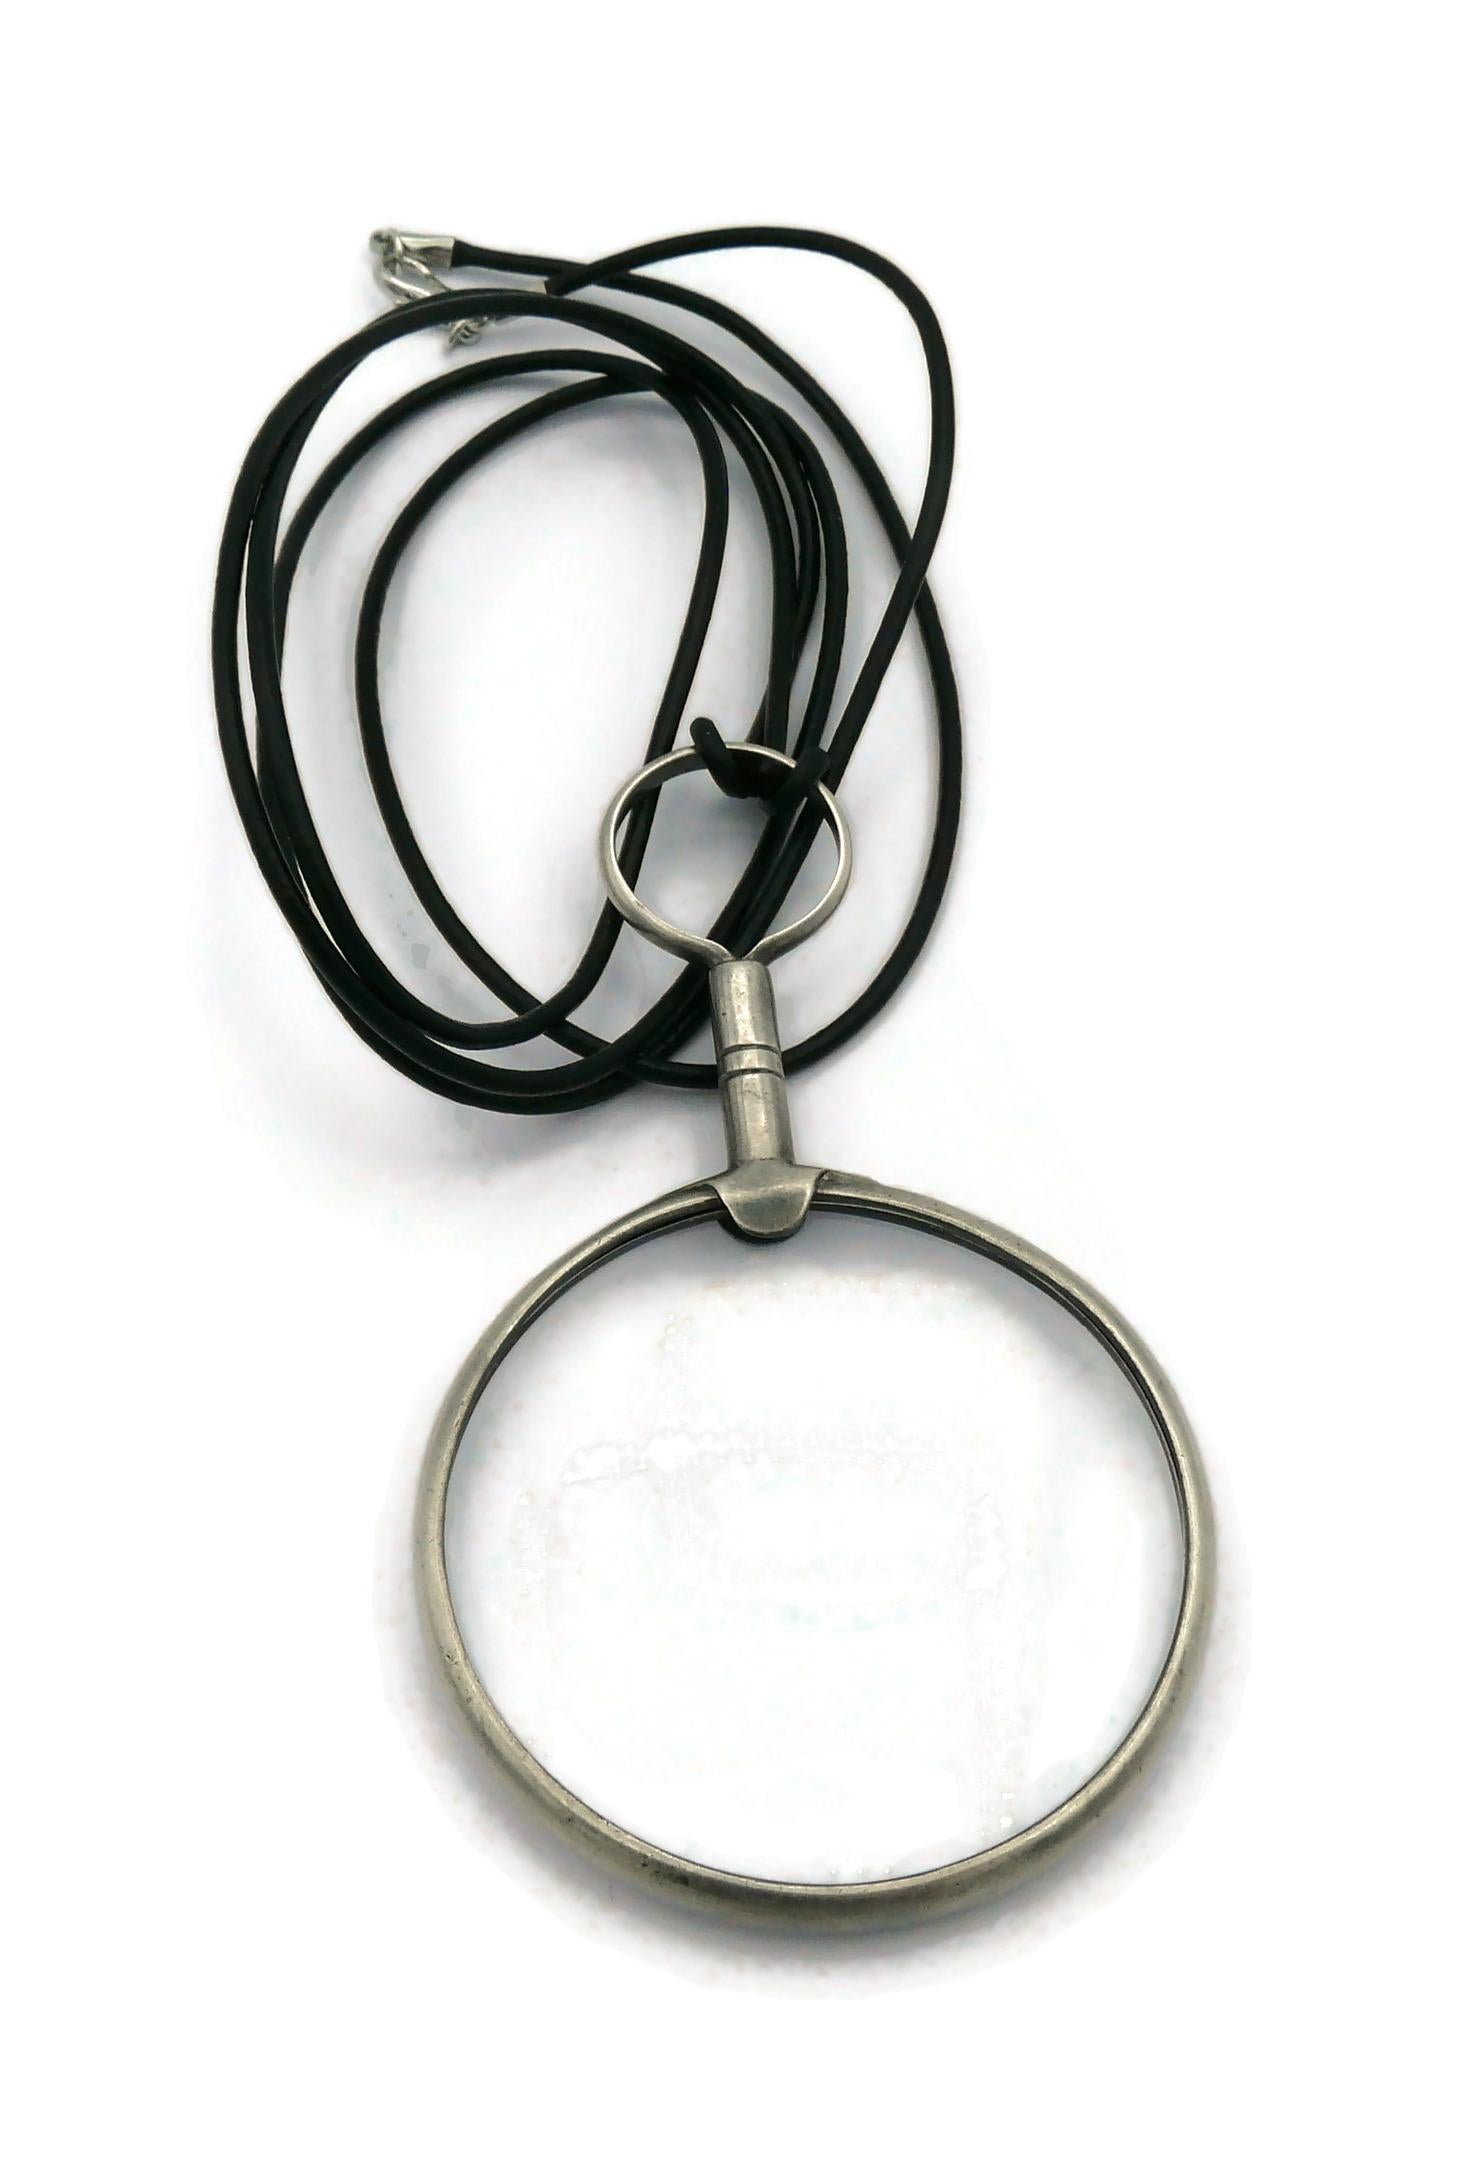 HERMES vintage silver magnifying glass pendant.

The pendant will come with a black leather shoe lace (not HERMES - see the pictures - length approx. 97 cm).

Embossed HERMES France.
French silver Crab hallmark.
Silversmith hallmark.

Indicative